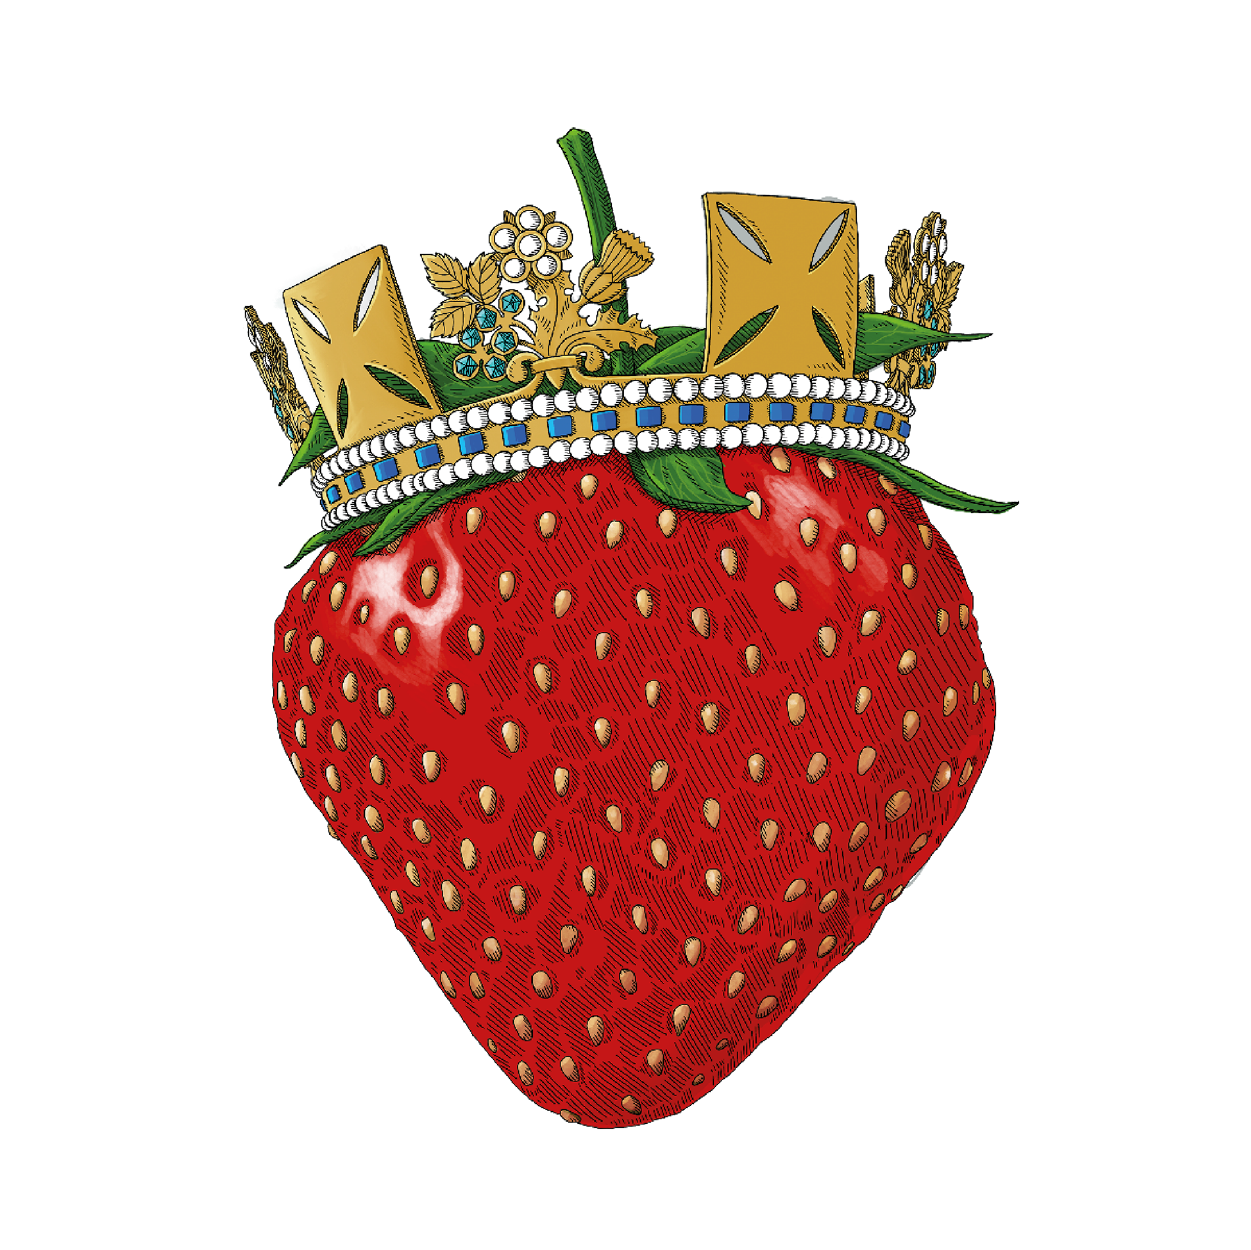 Red British Queen strawberry with a gold crown on top